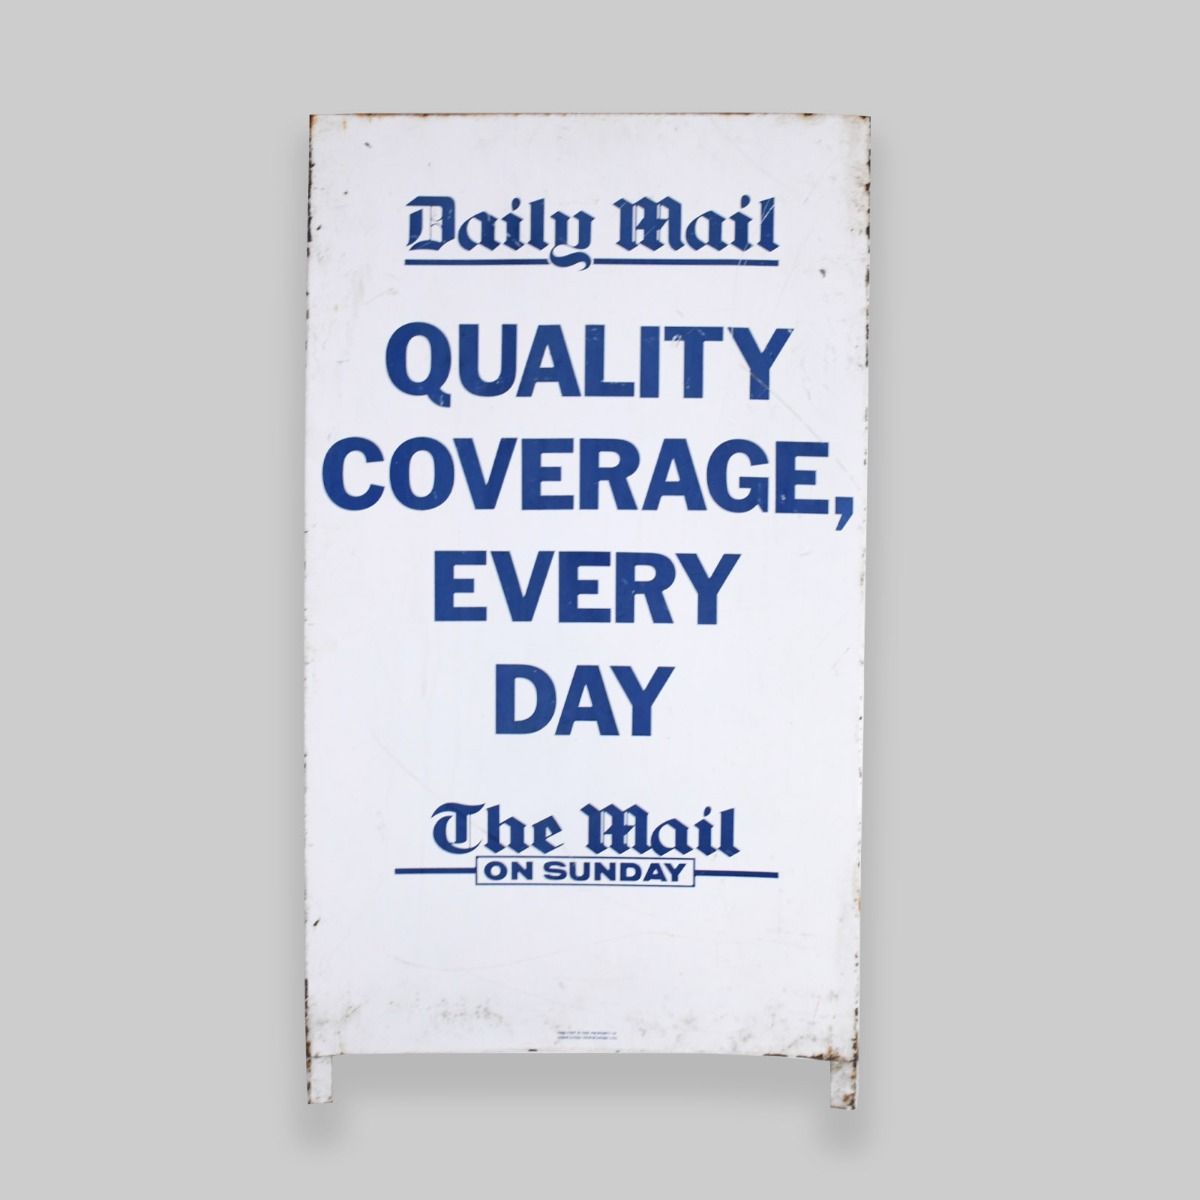 Vintage Daily Mail Newspaper Advertising Board